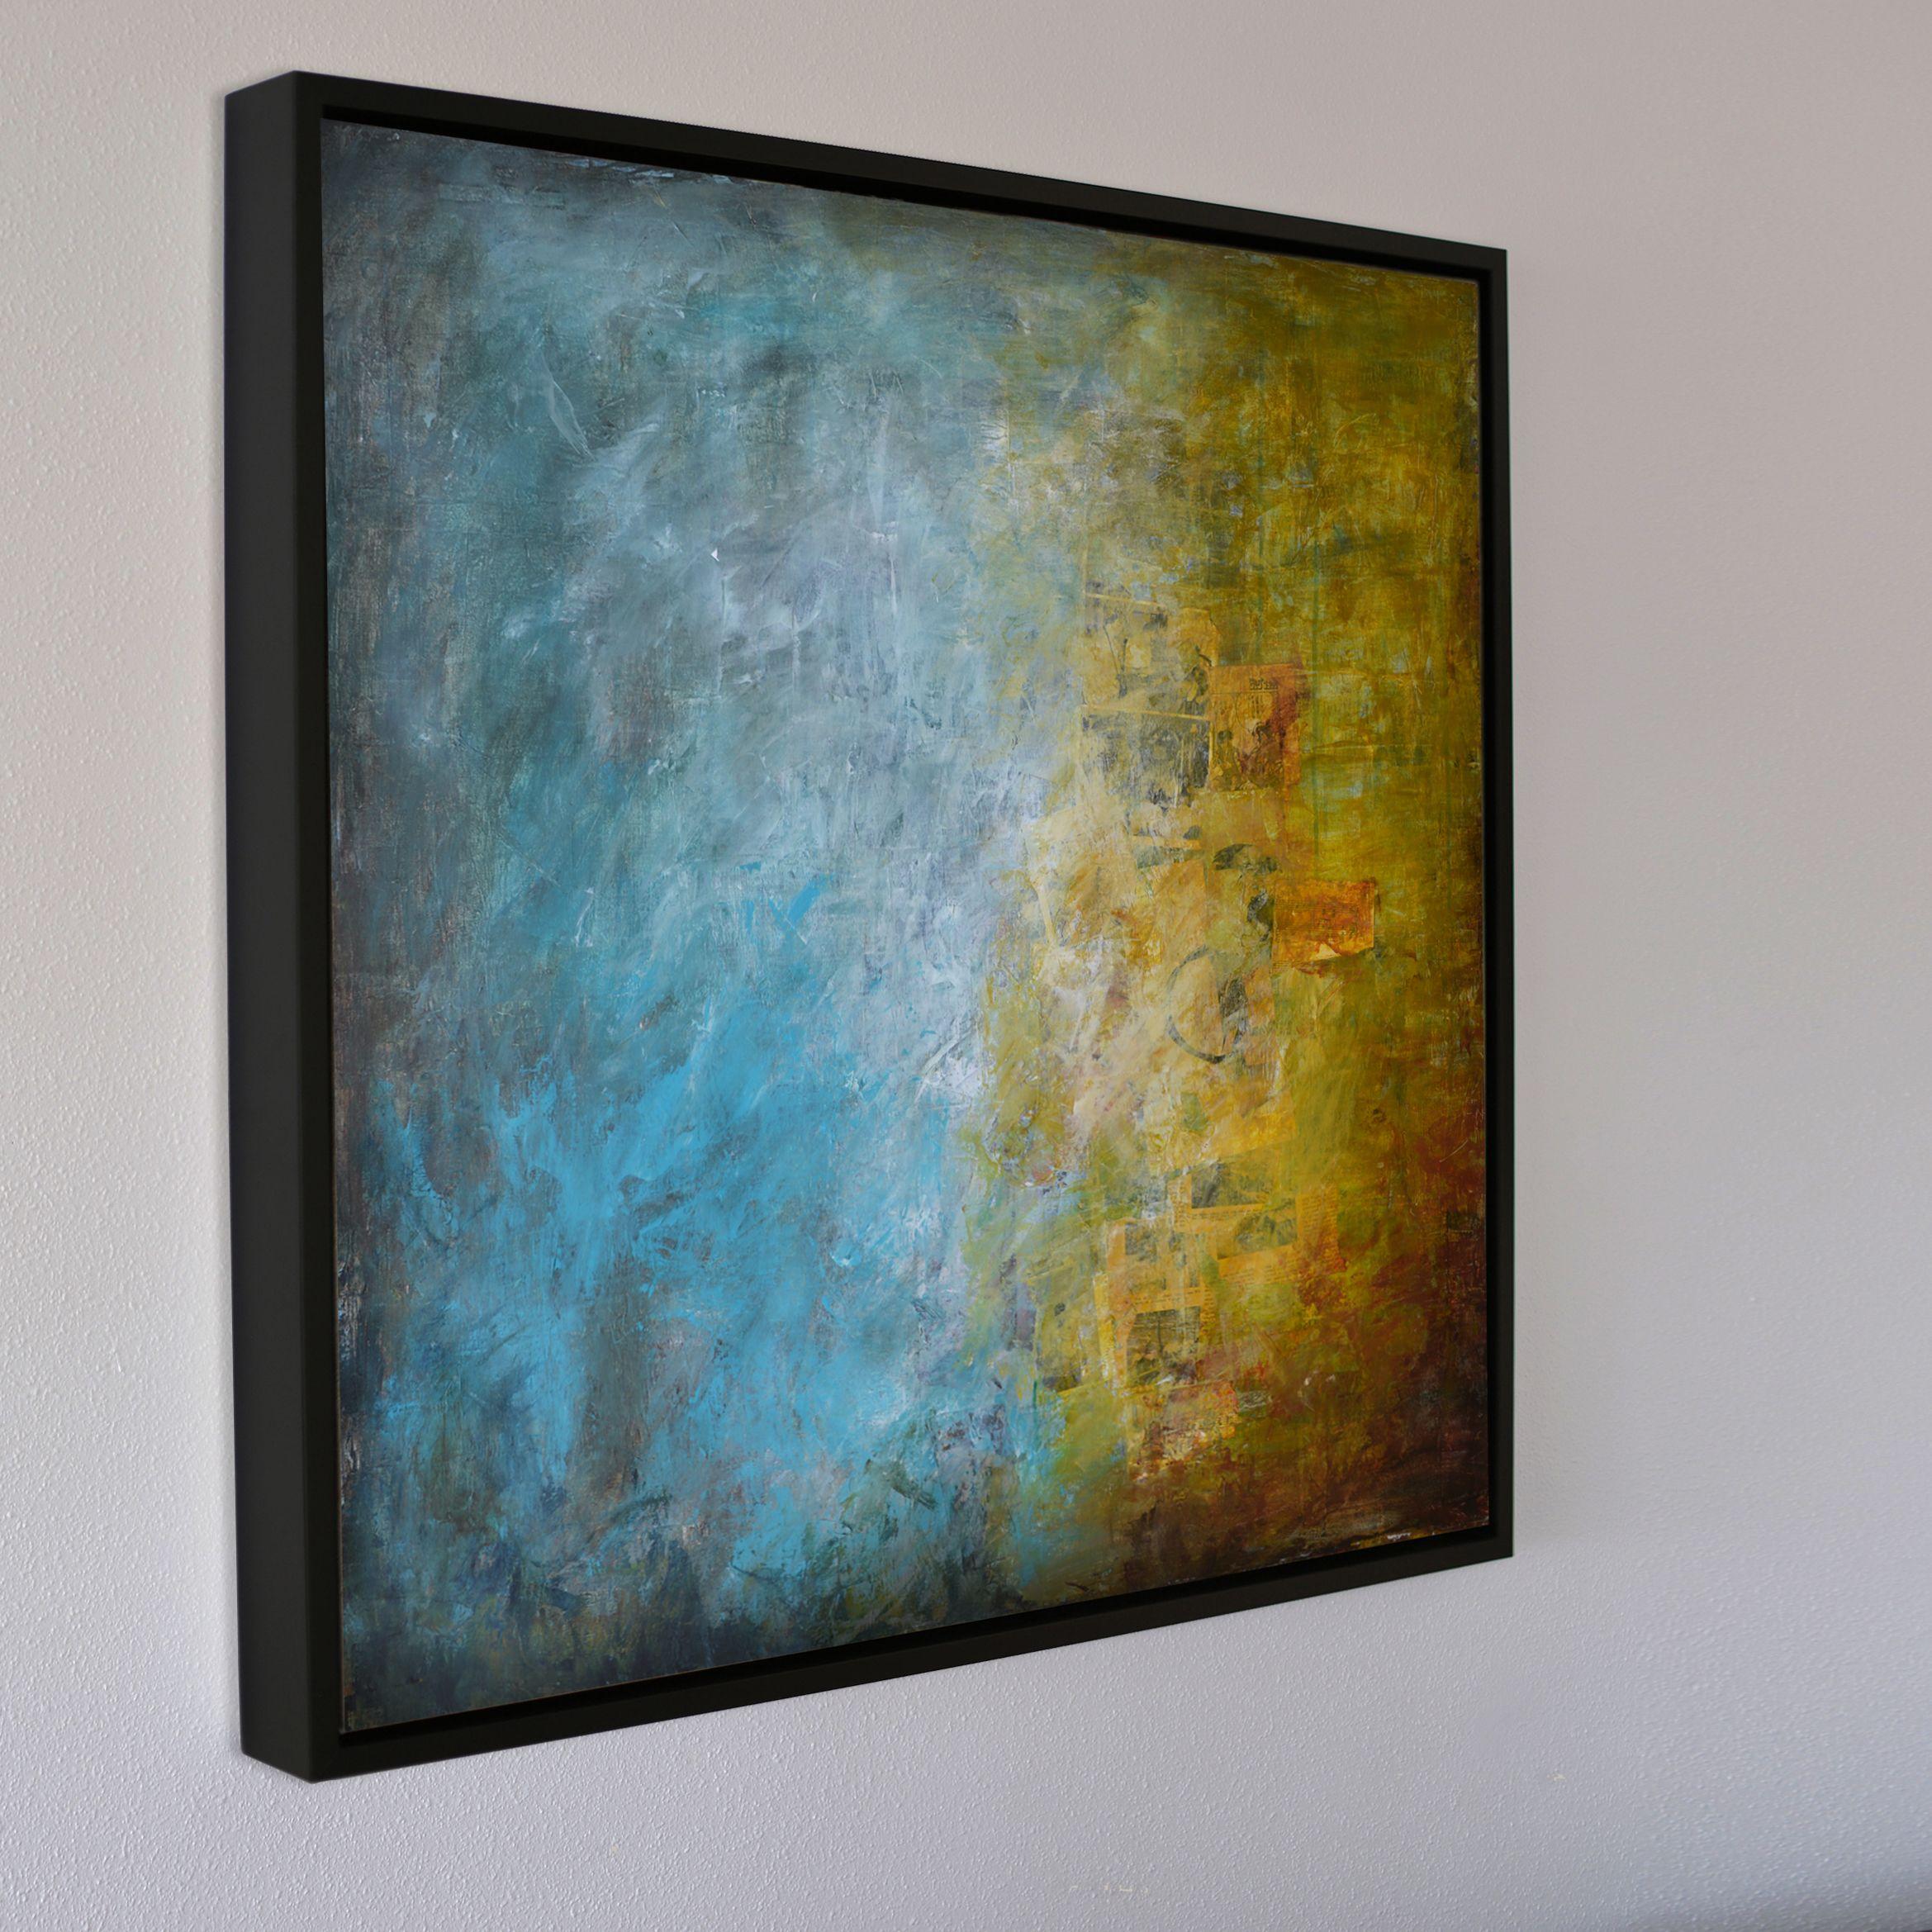 Robert creates paintings notable for their texture, and sculptural presence with layers of impasto paint. His richness of palette and his use of strong colors that he put on linen canvas, creates a compelling work of mixed media art by which the